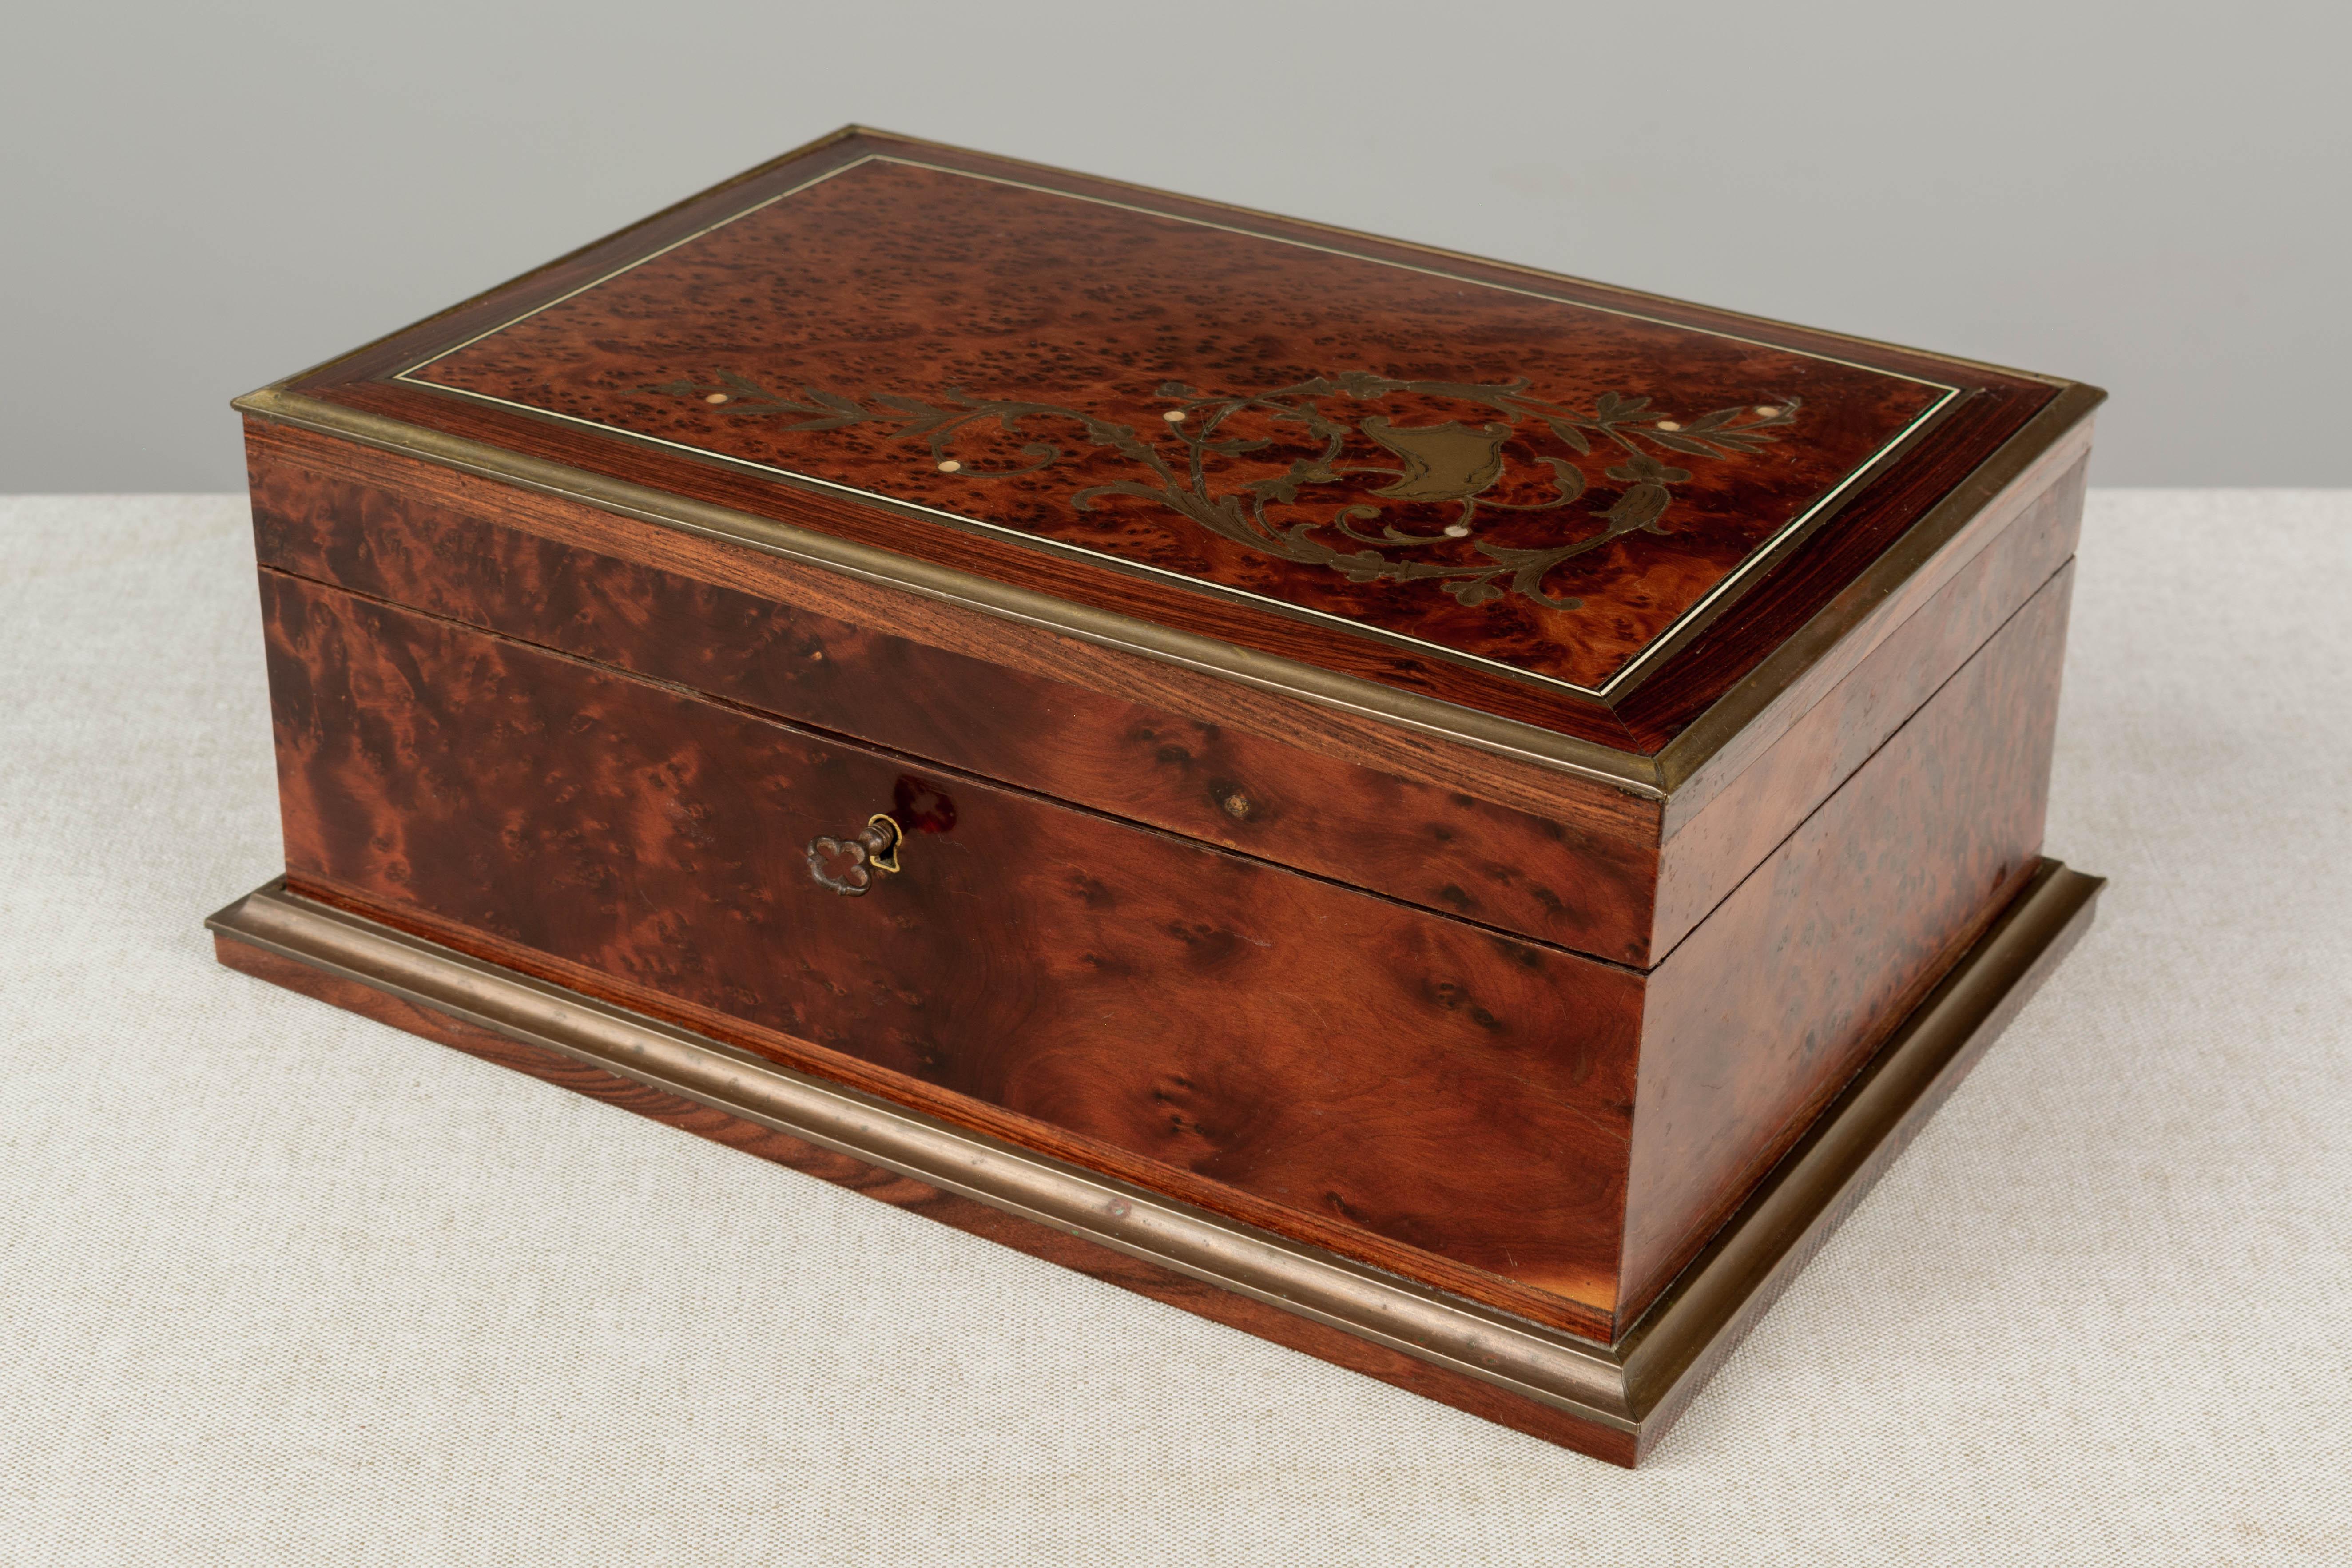 A 19th Century French Napoleon III marquetry sewing box. Made of mahogany with thuya wood top inlaid with brass and mother of pearl. Brass trim frames the lid and the base. The interior is lined in red silk and is fitted with a collection of 15